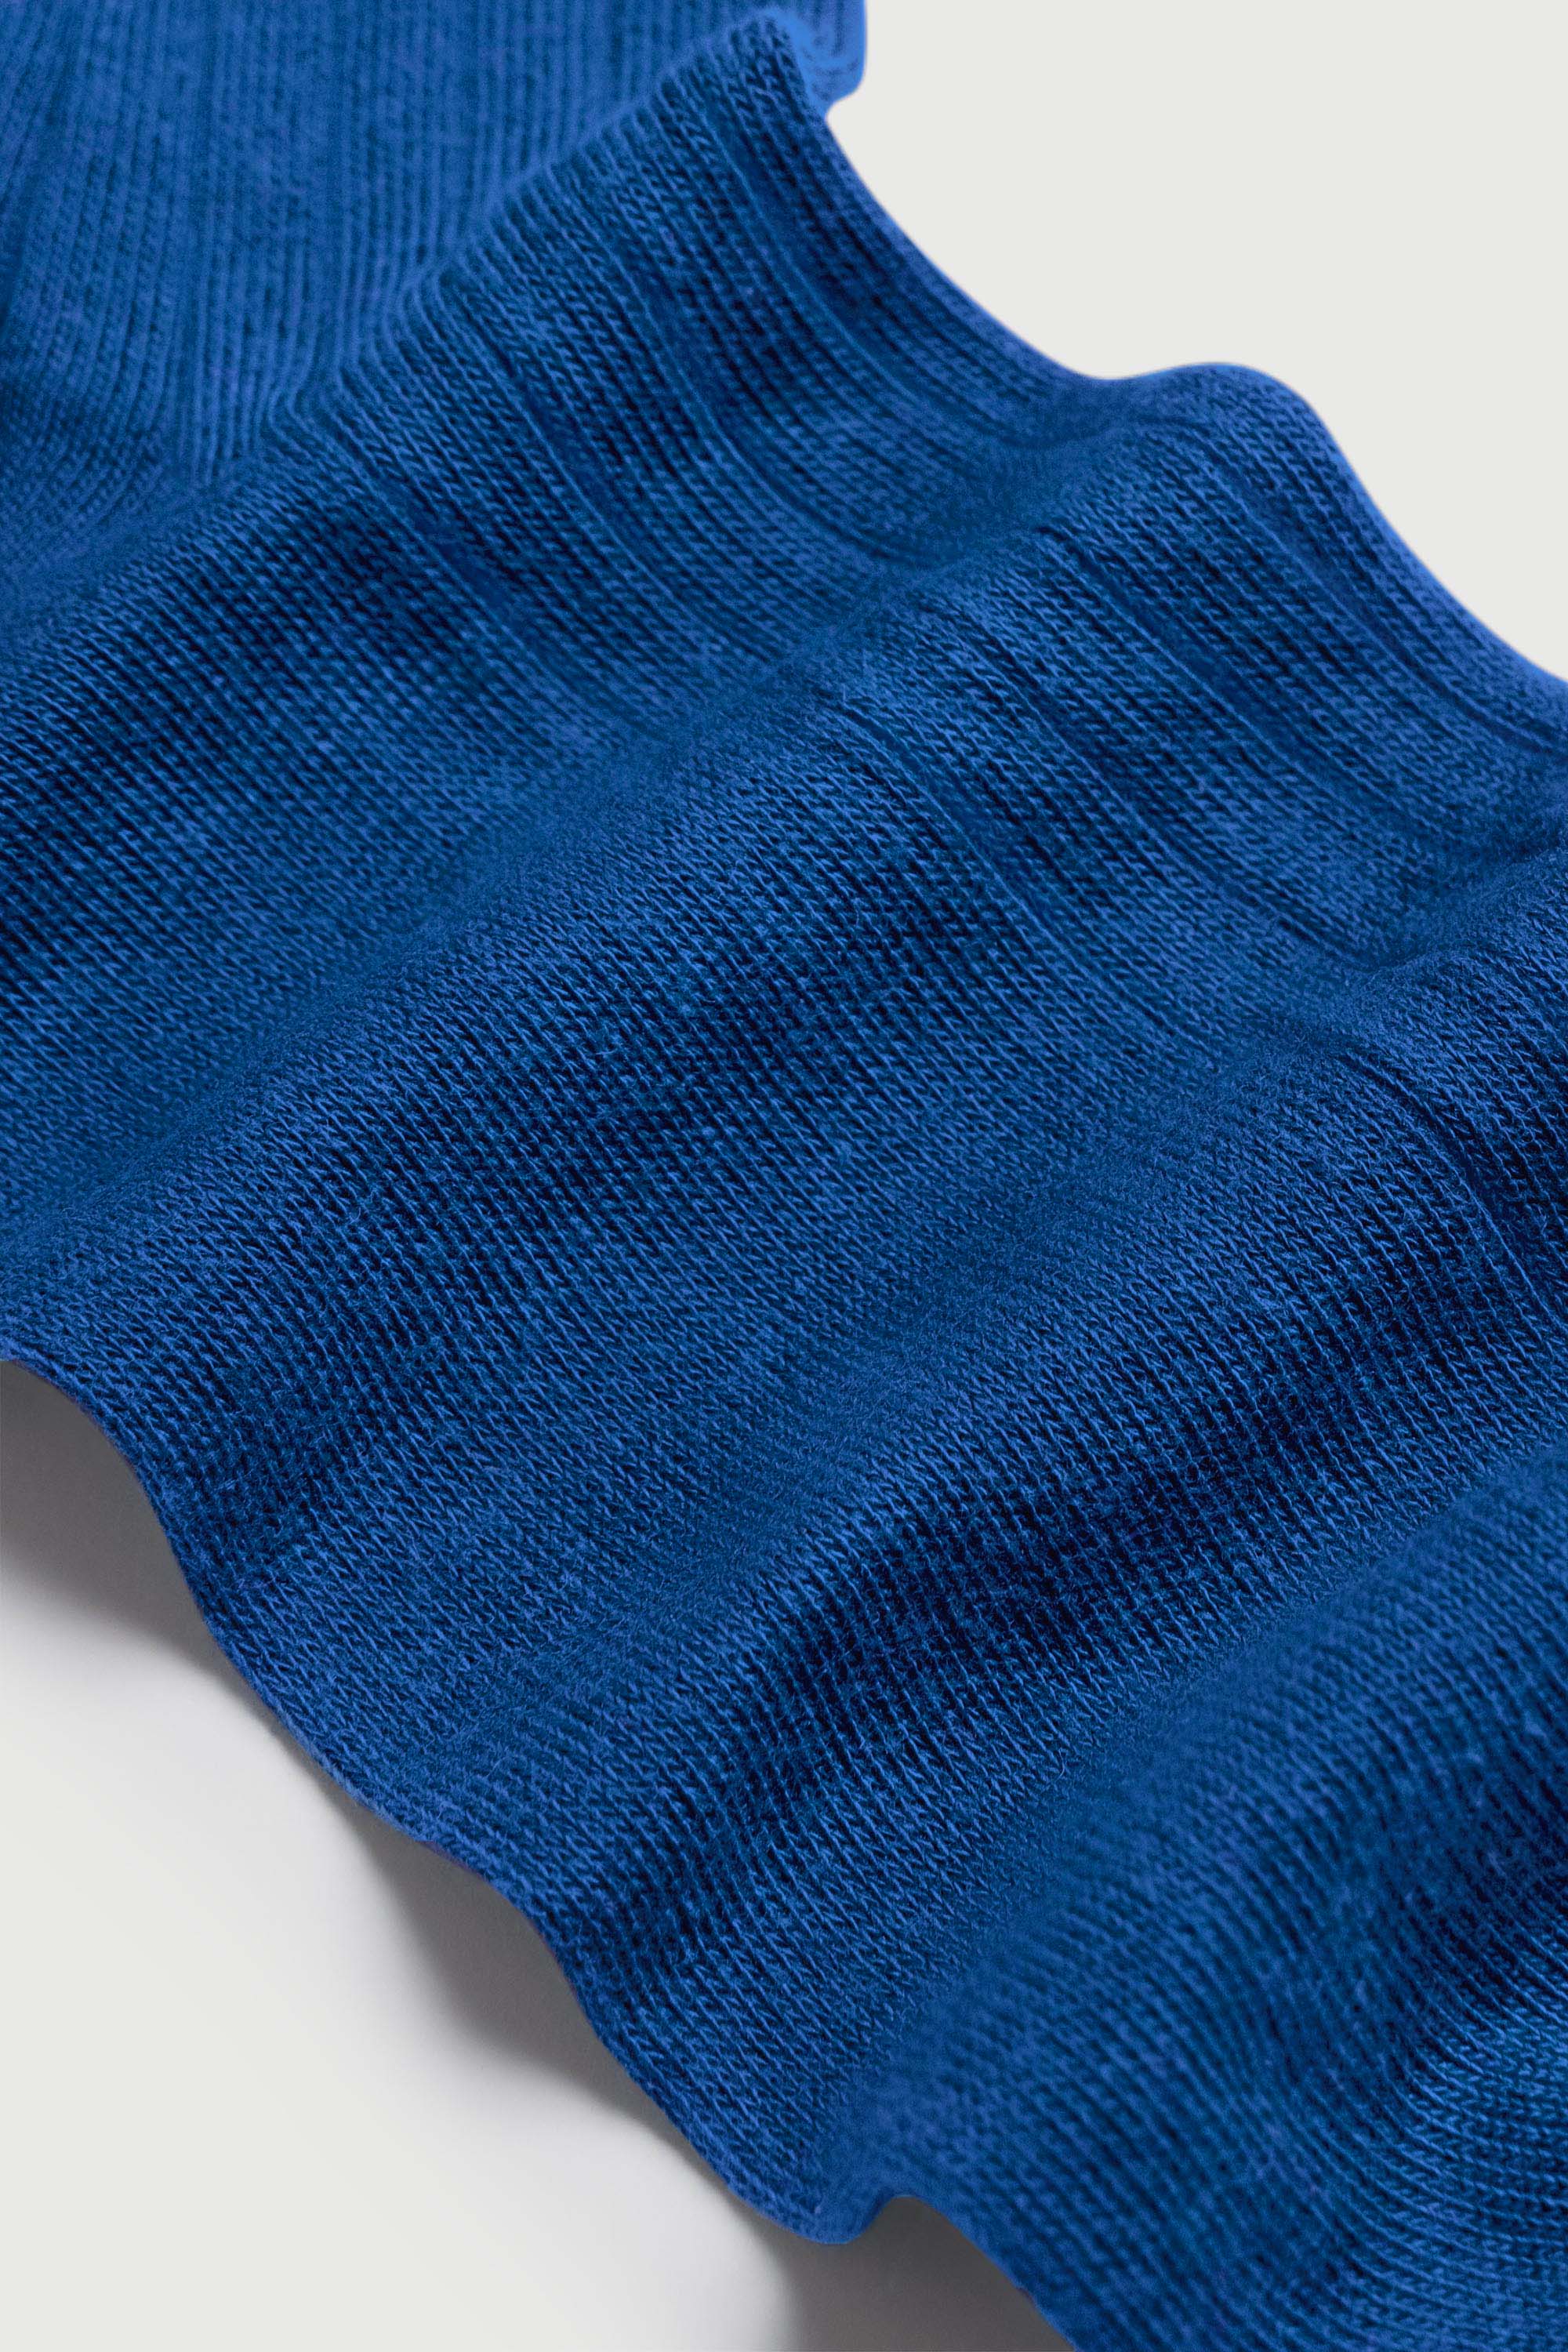 Footbed detail, The Yves Sock in Sapphire blue, Egyptian cotton sock by Comme Si